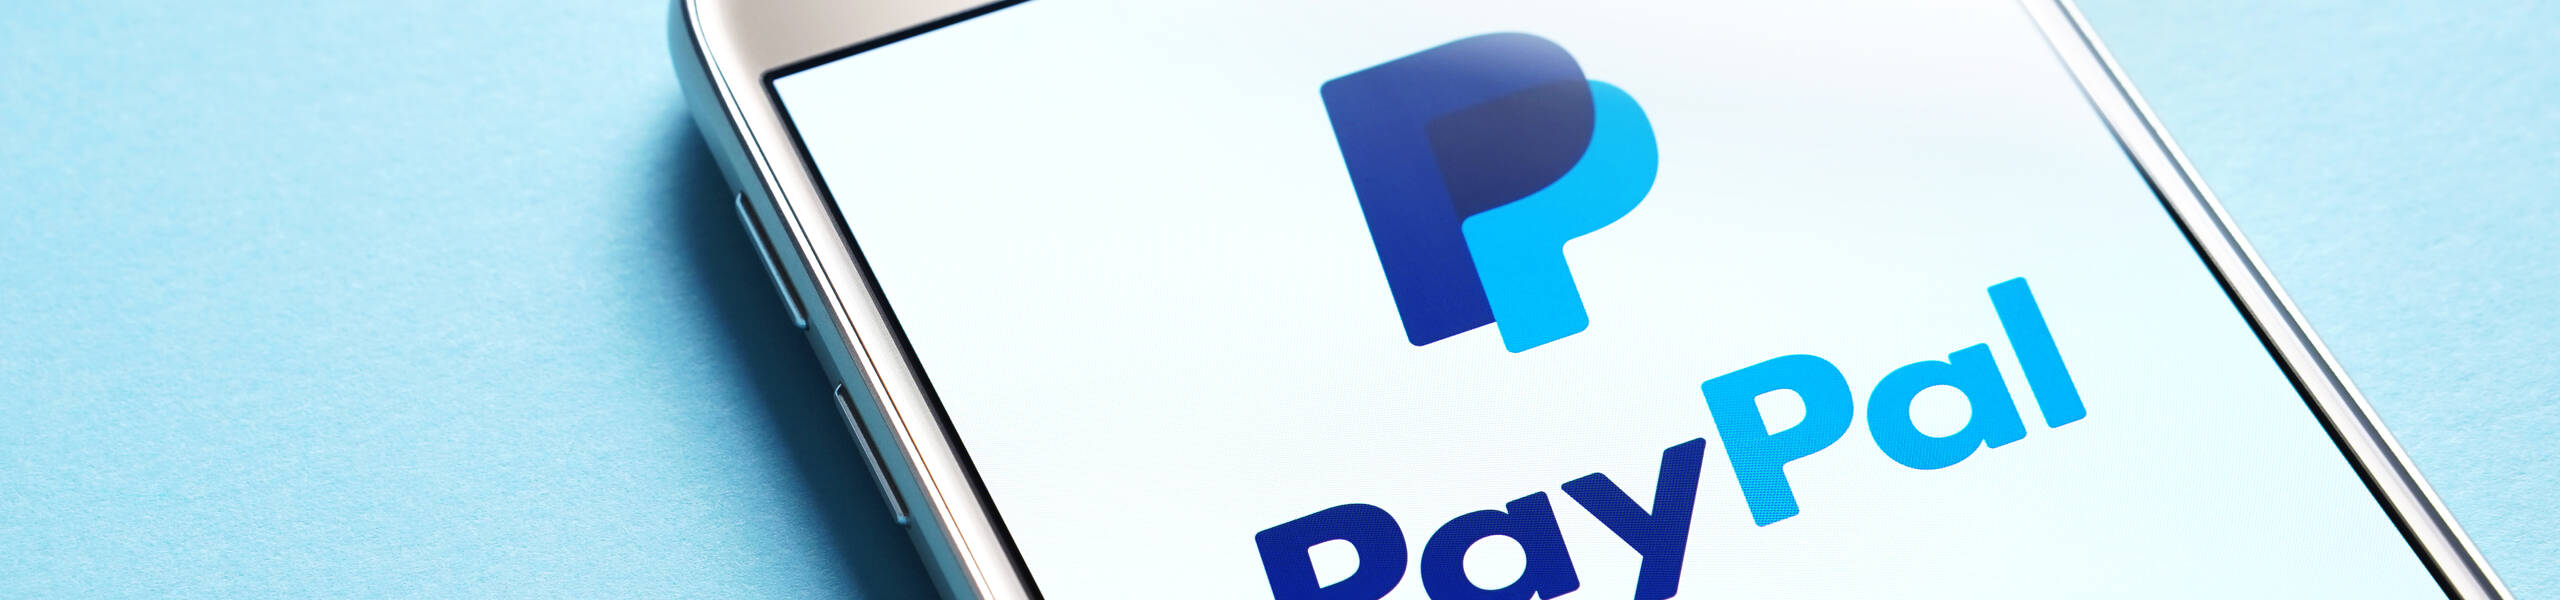 PayPal: Another Stock Trading Platform?